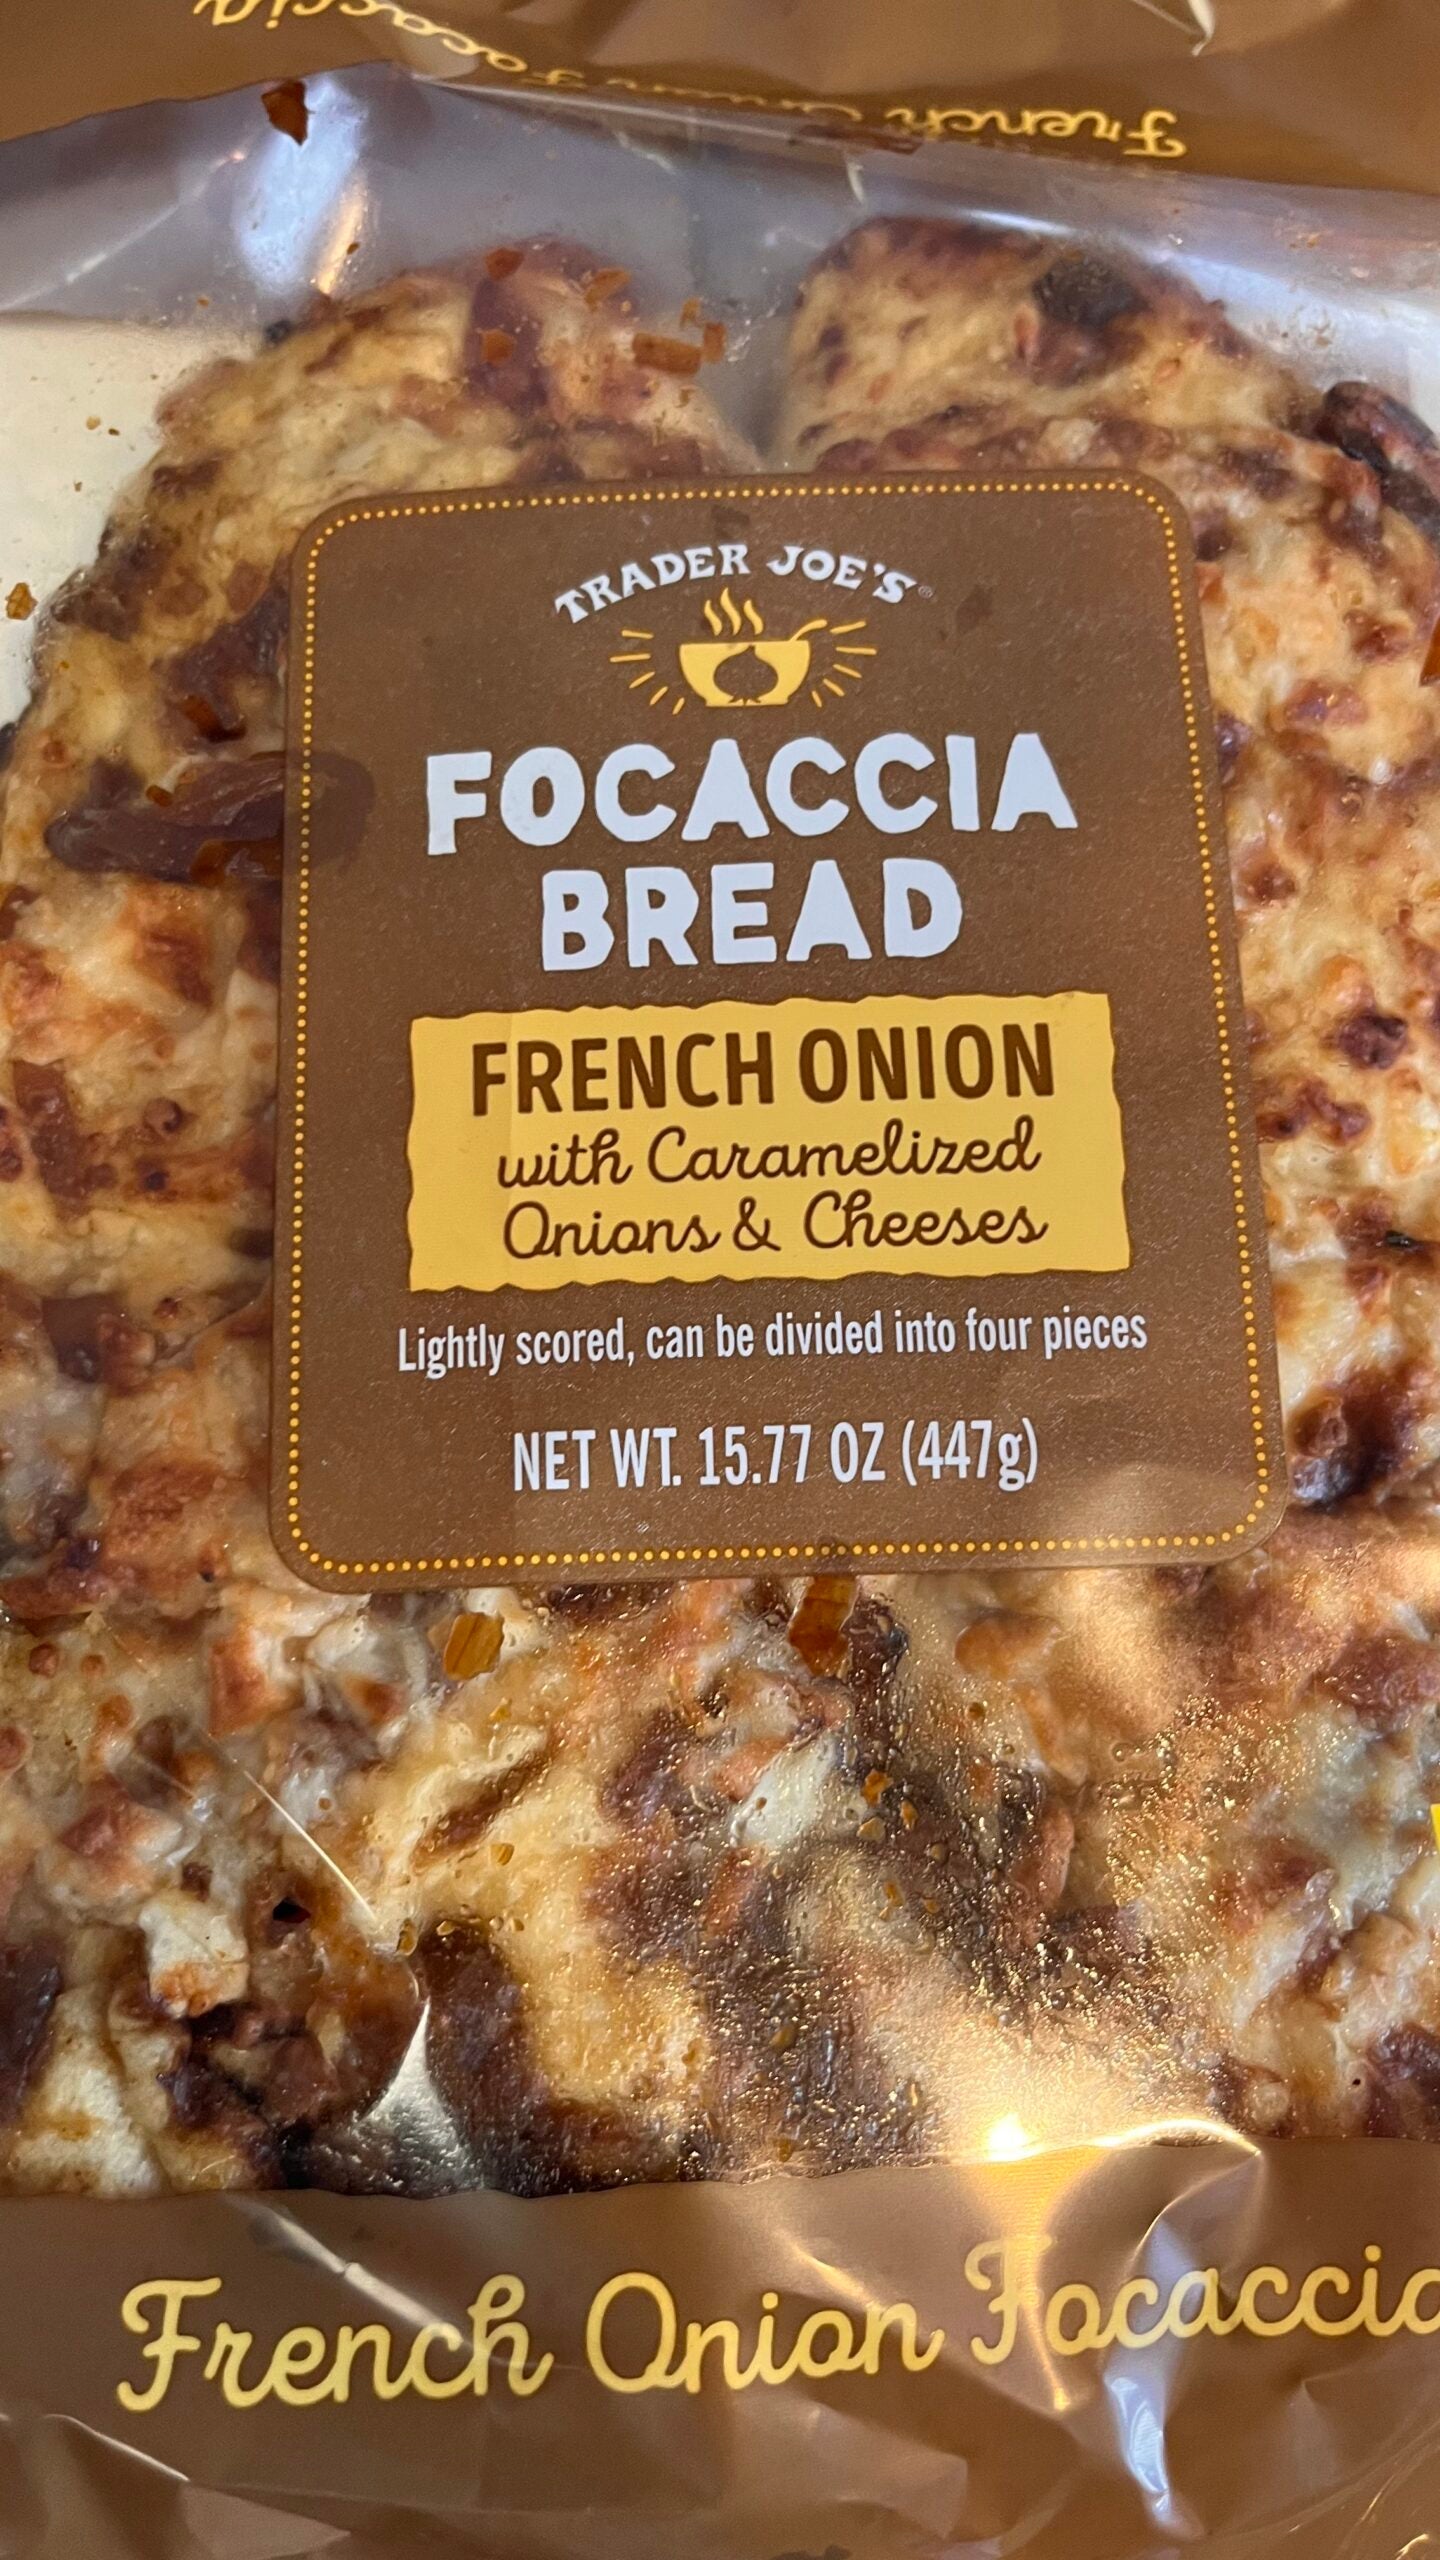 French Onion Focaccia Bread w/ Caramelized Onions and Cheese